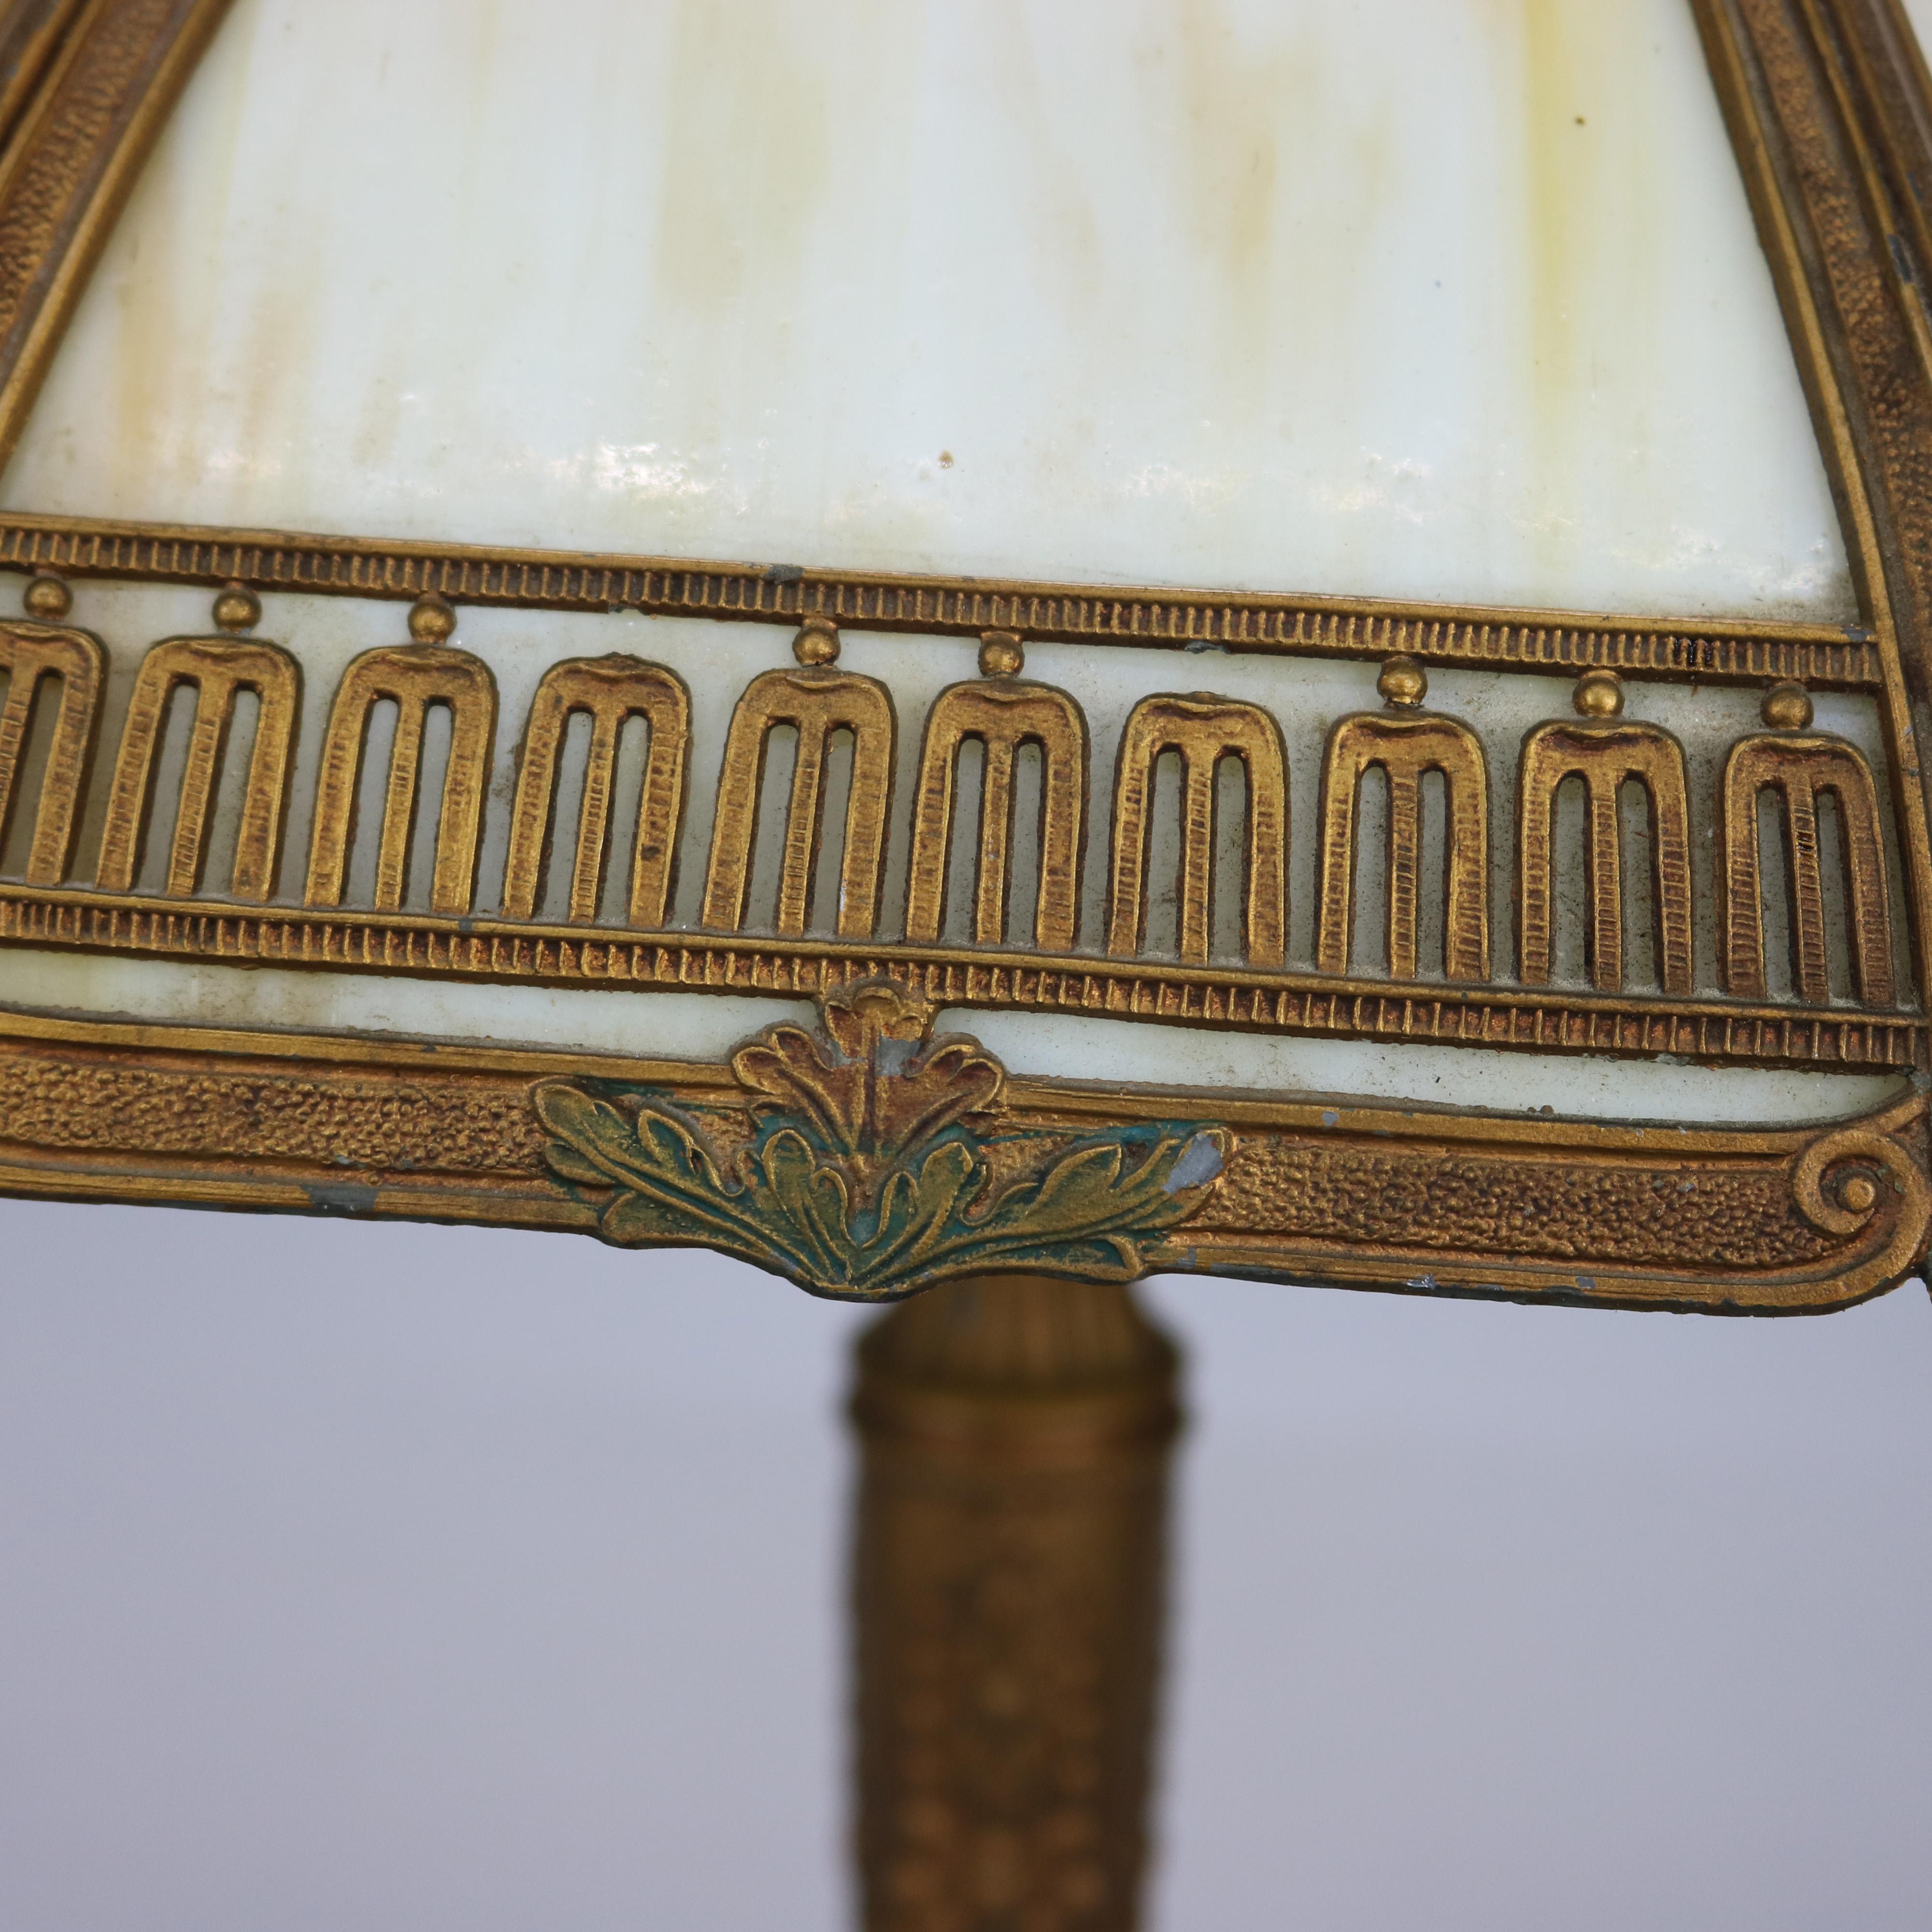 An Arts and Crafts table lamp in the manner of Bradley and Hubbard offers domed filigree shade housing bent slag glass panels over double socket base having urn form with floral relief, c1920

Measures: 22.25